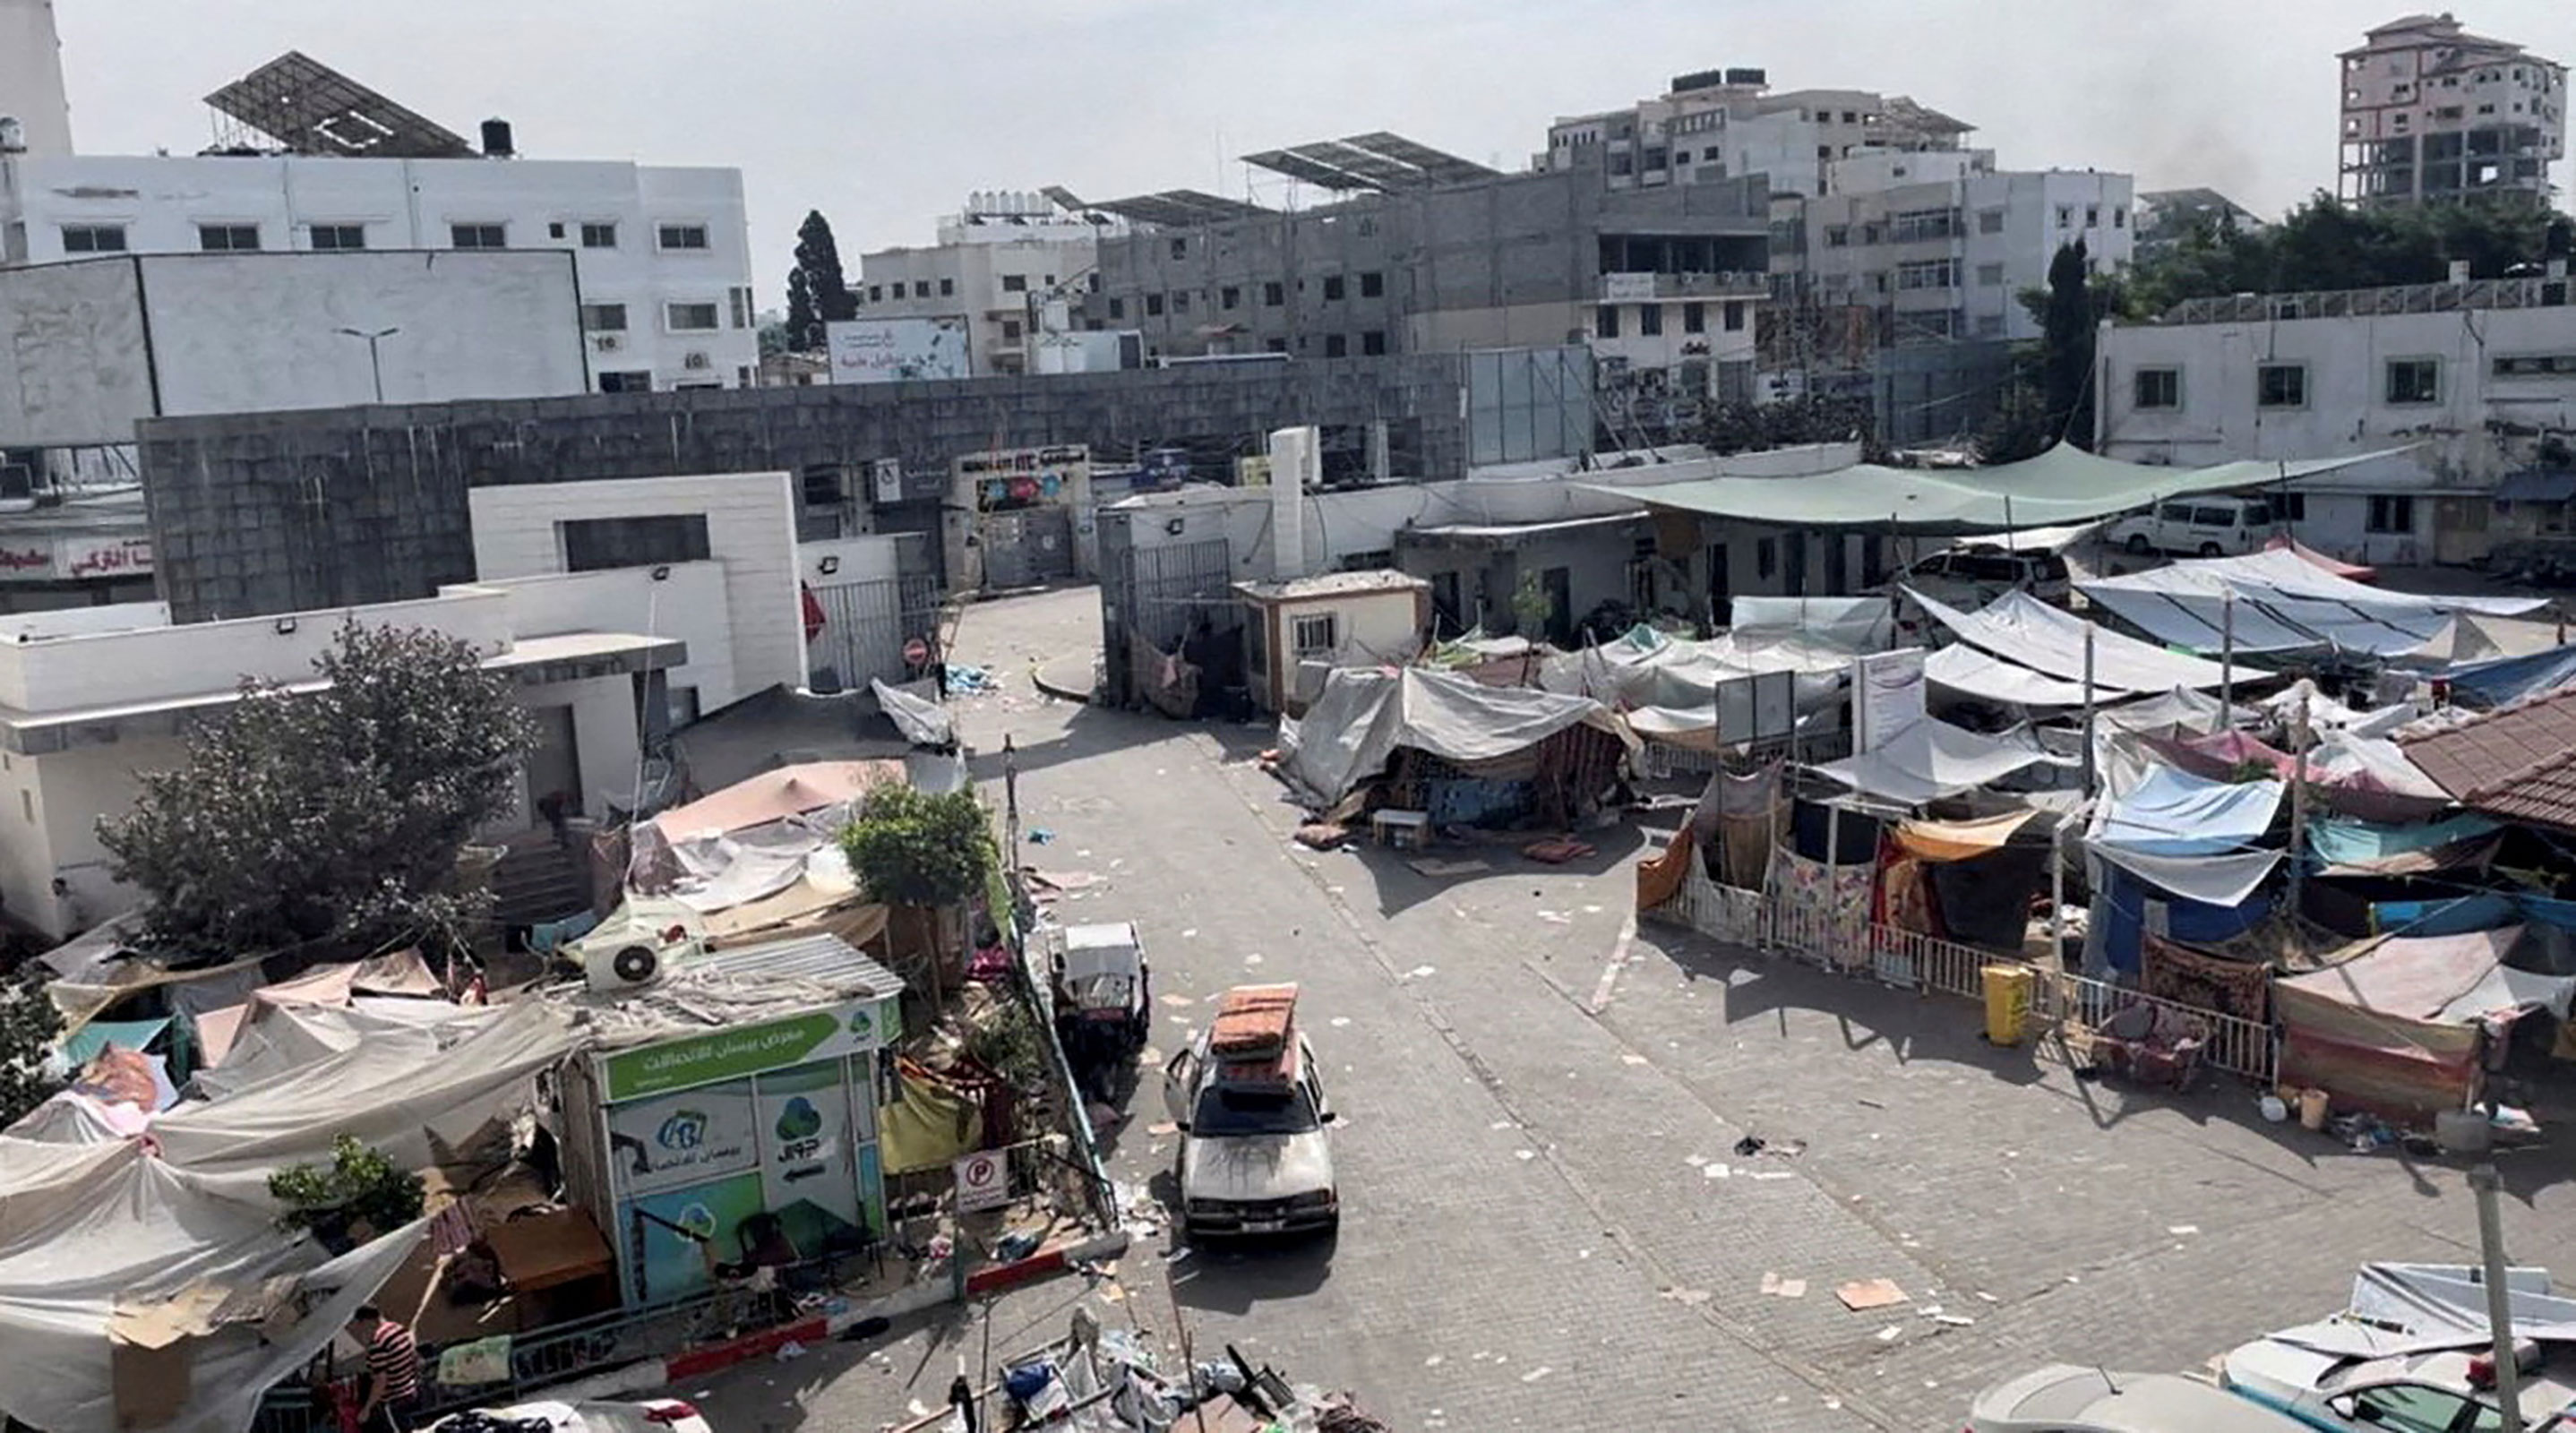 Tents and shelters used by displaced Palestinians stand at the yard of Al-Shifa hospital in Gaza City on November 12.